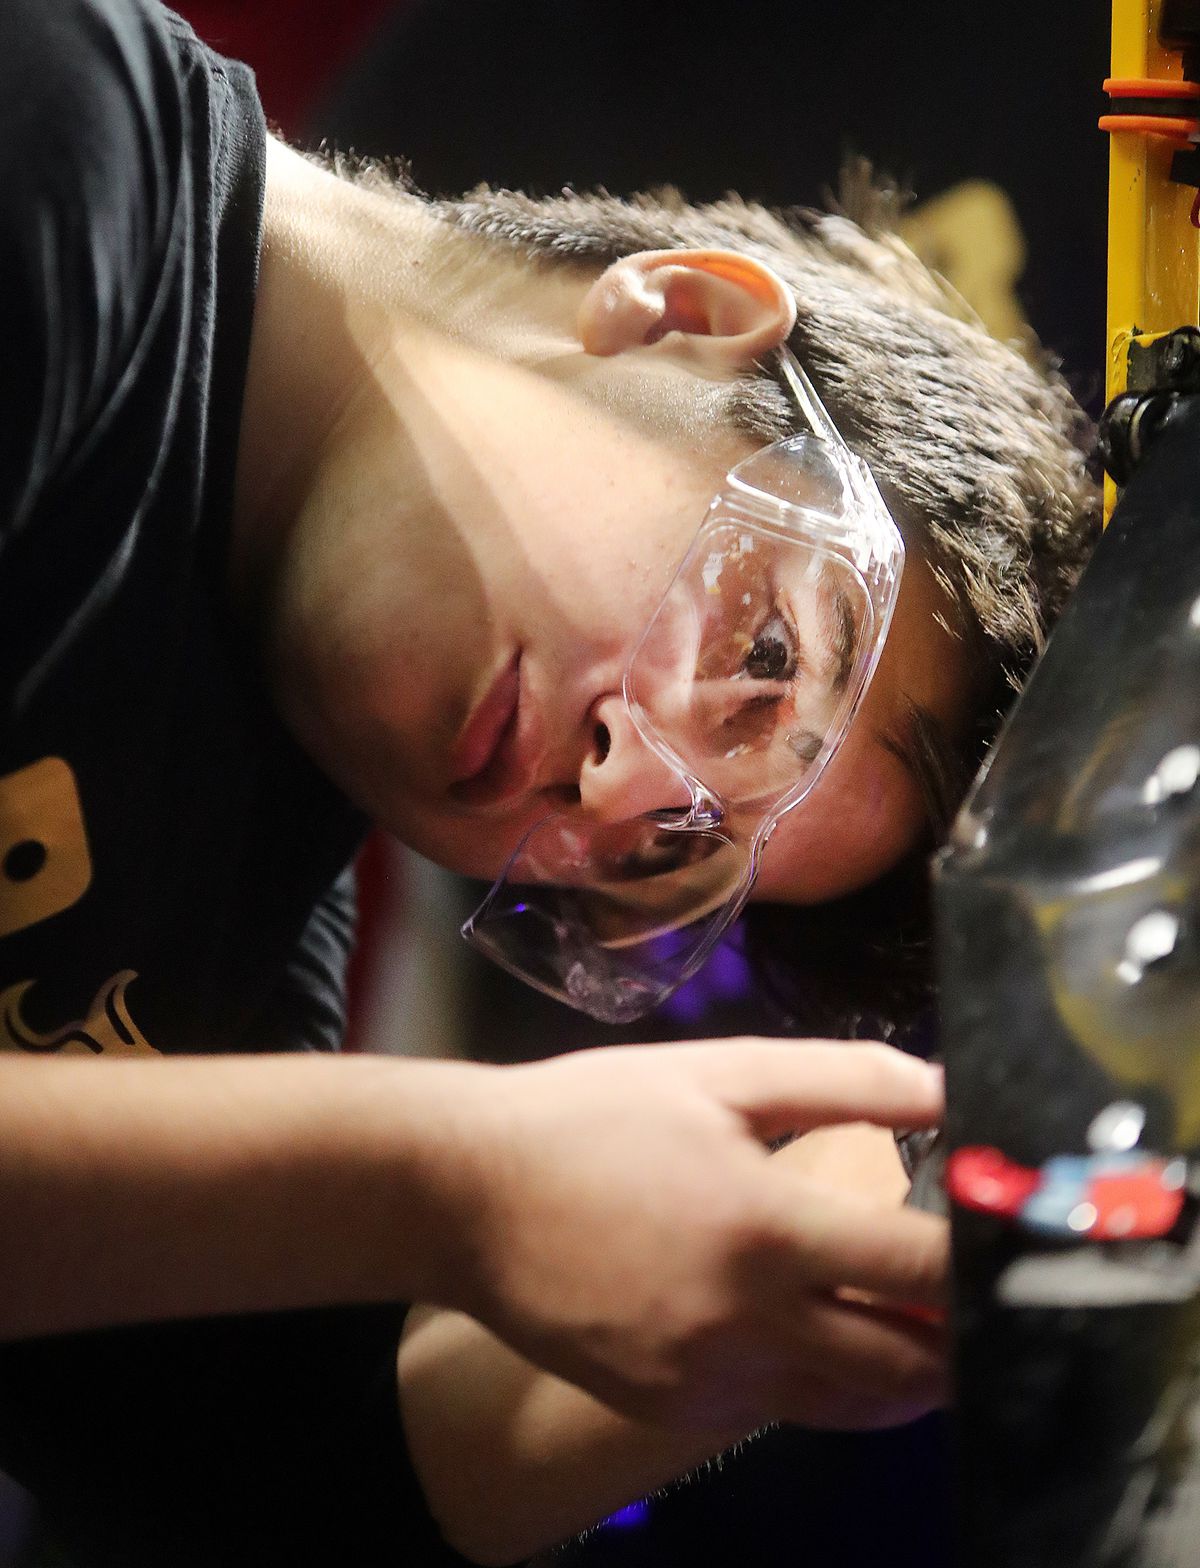 Sadam Alsavsavi joins in on working on the robot as students from Cottonwood High School work to compete in the First Robotics Competition Utah Regional event at the Maverik Center in West Valley City, Utah, on Friday, March 29, 2019.